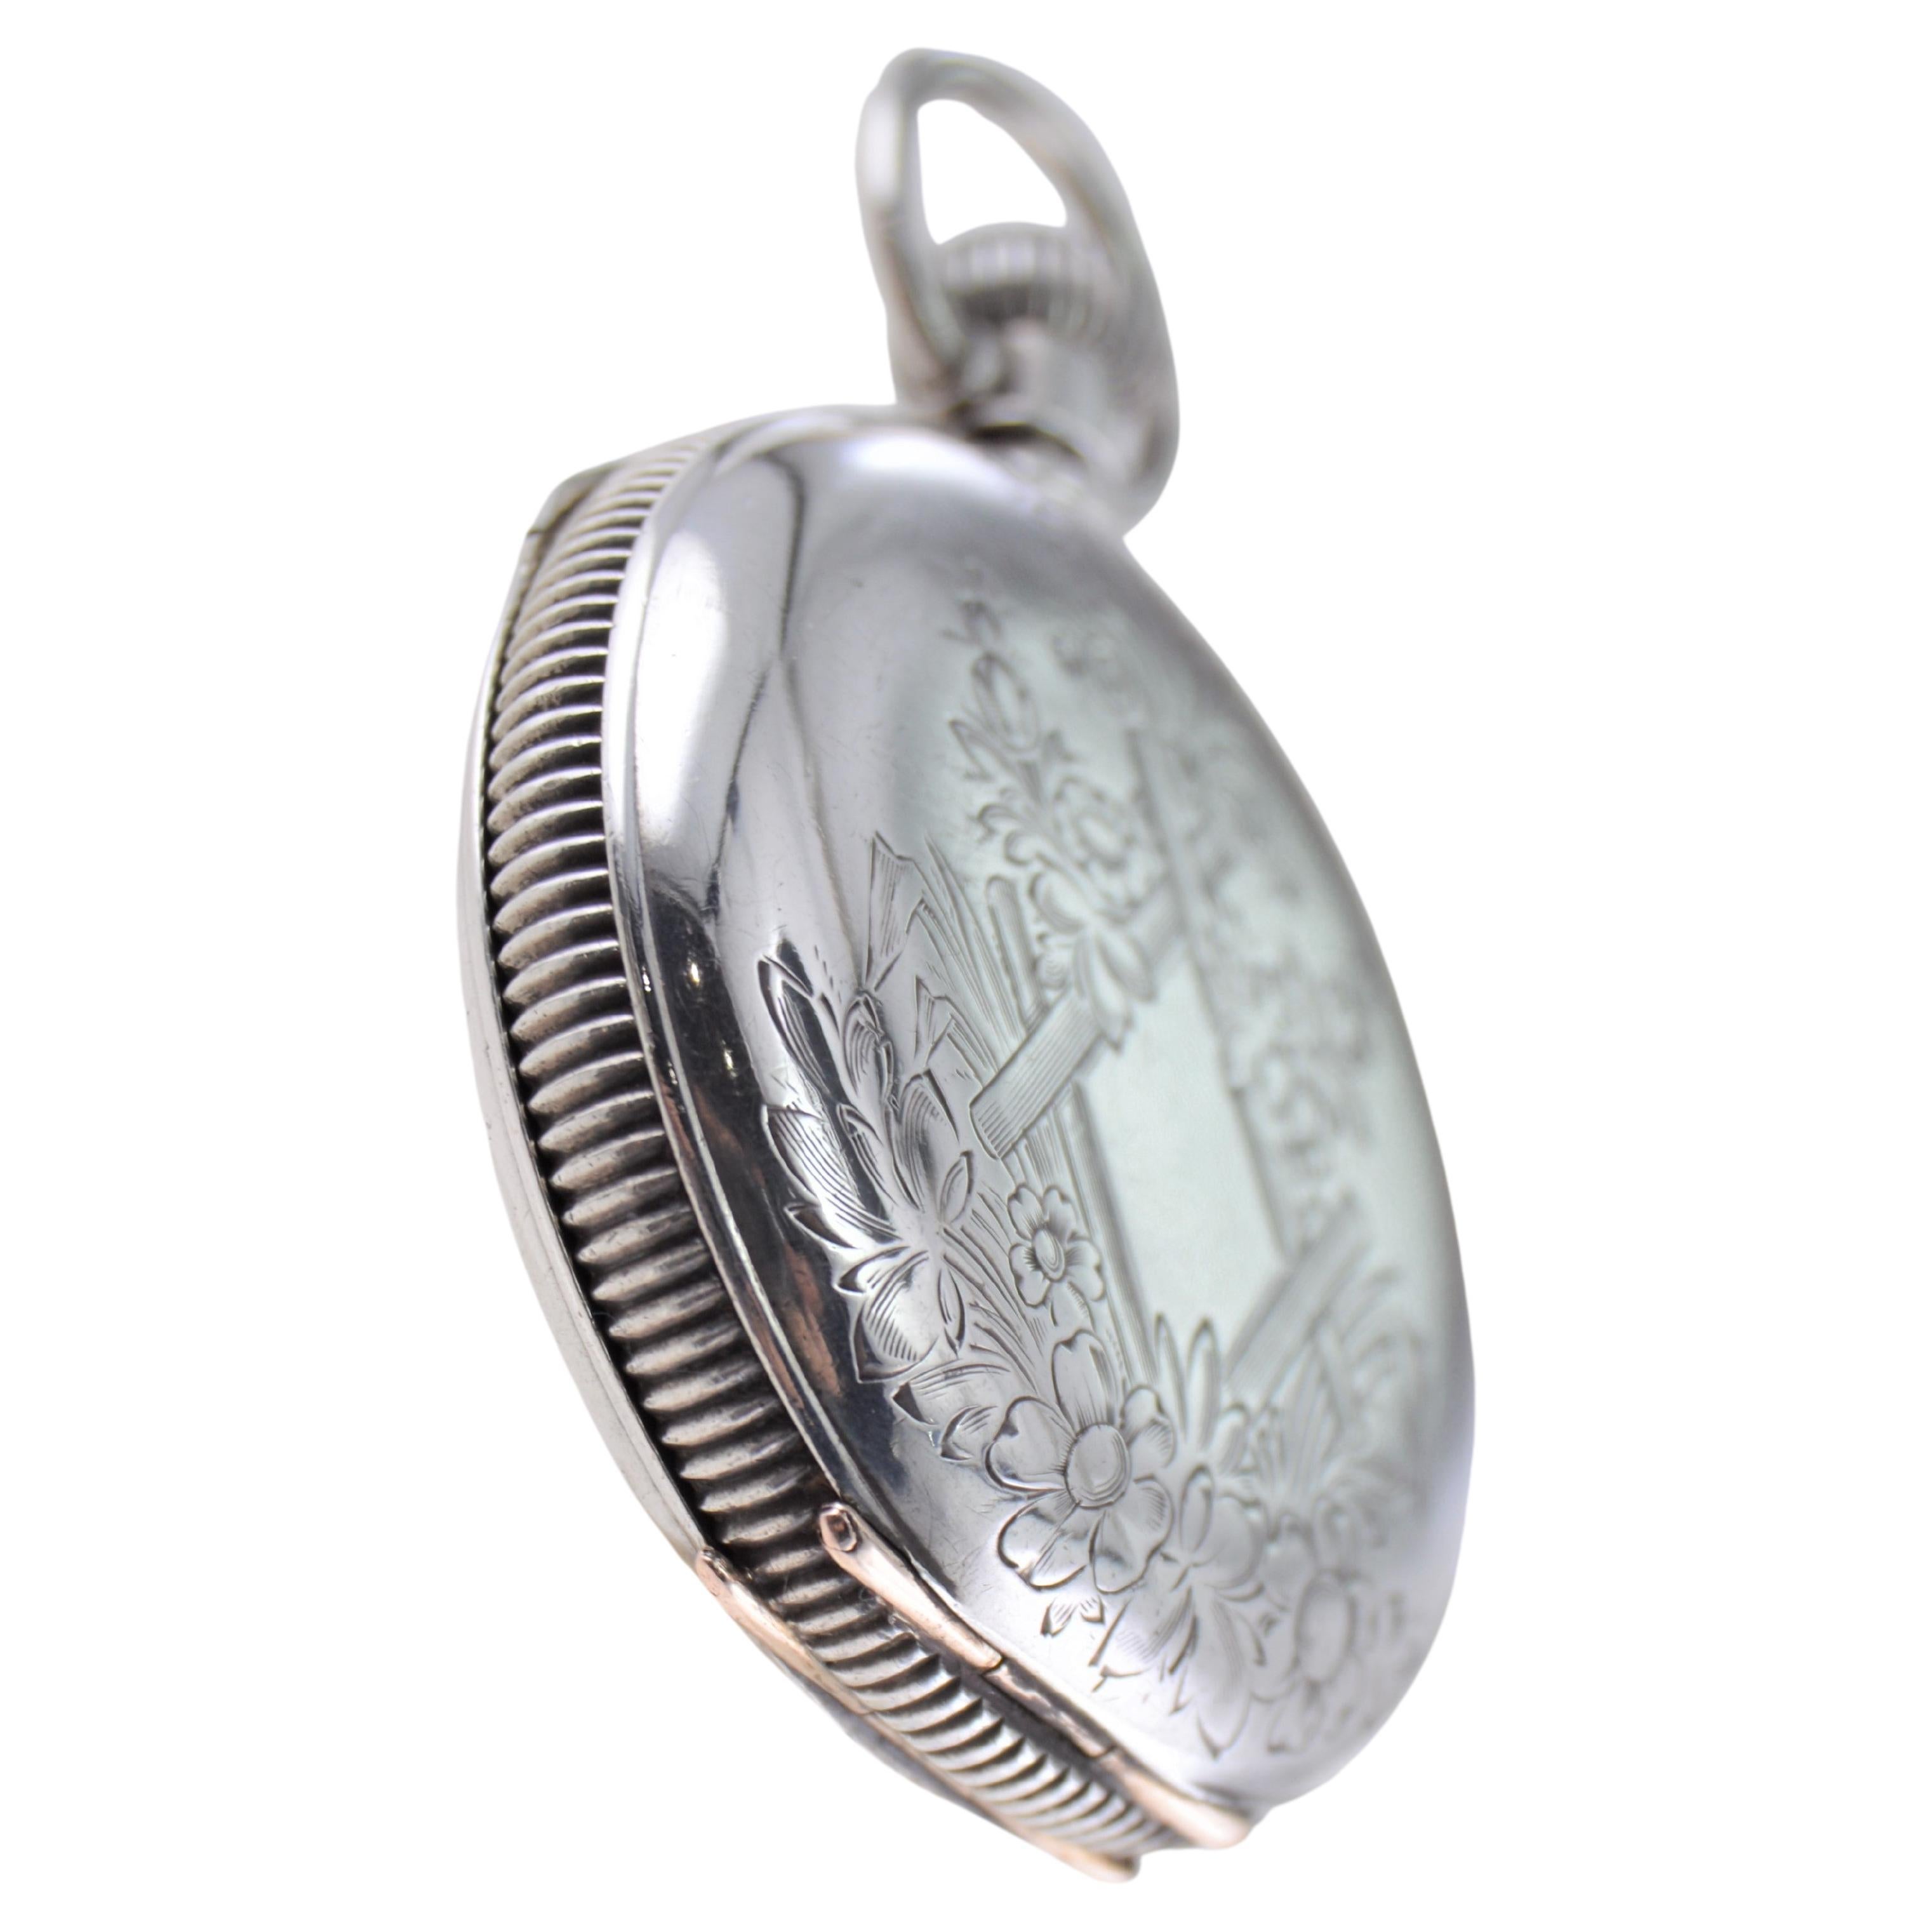 Illinois Silver Hunters Case Pocket Watch from 1893 with Pocket Watch Chain  1